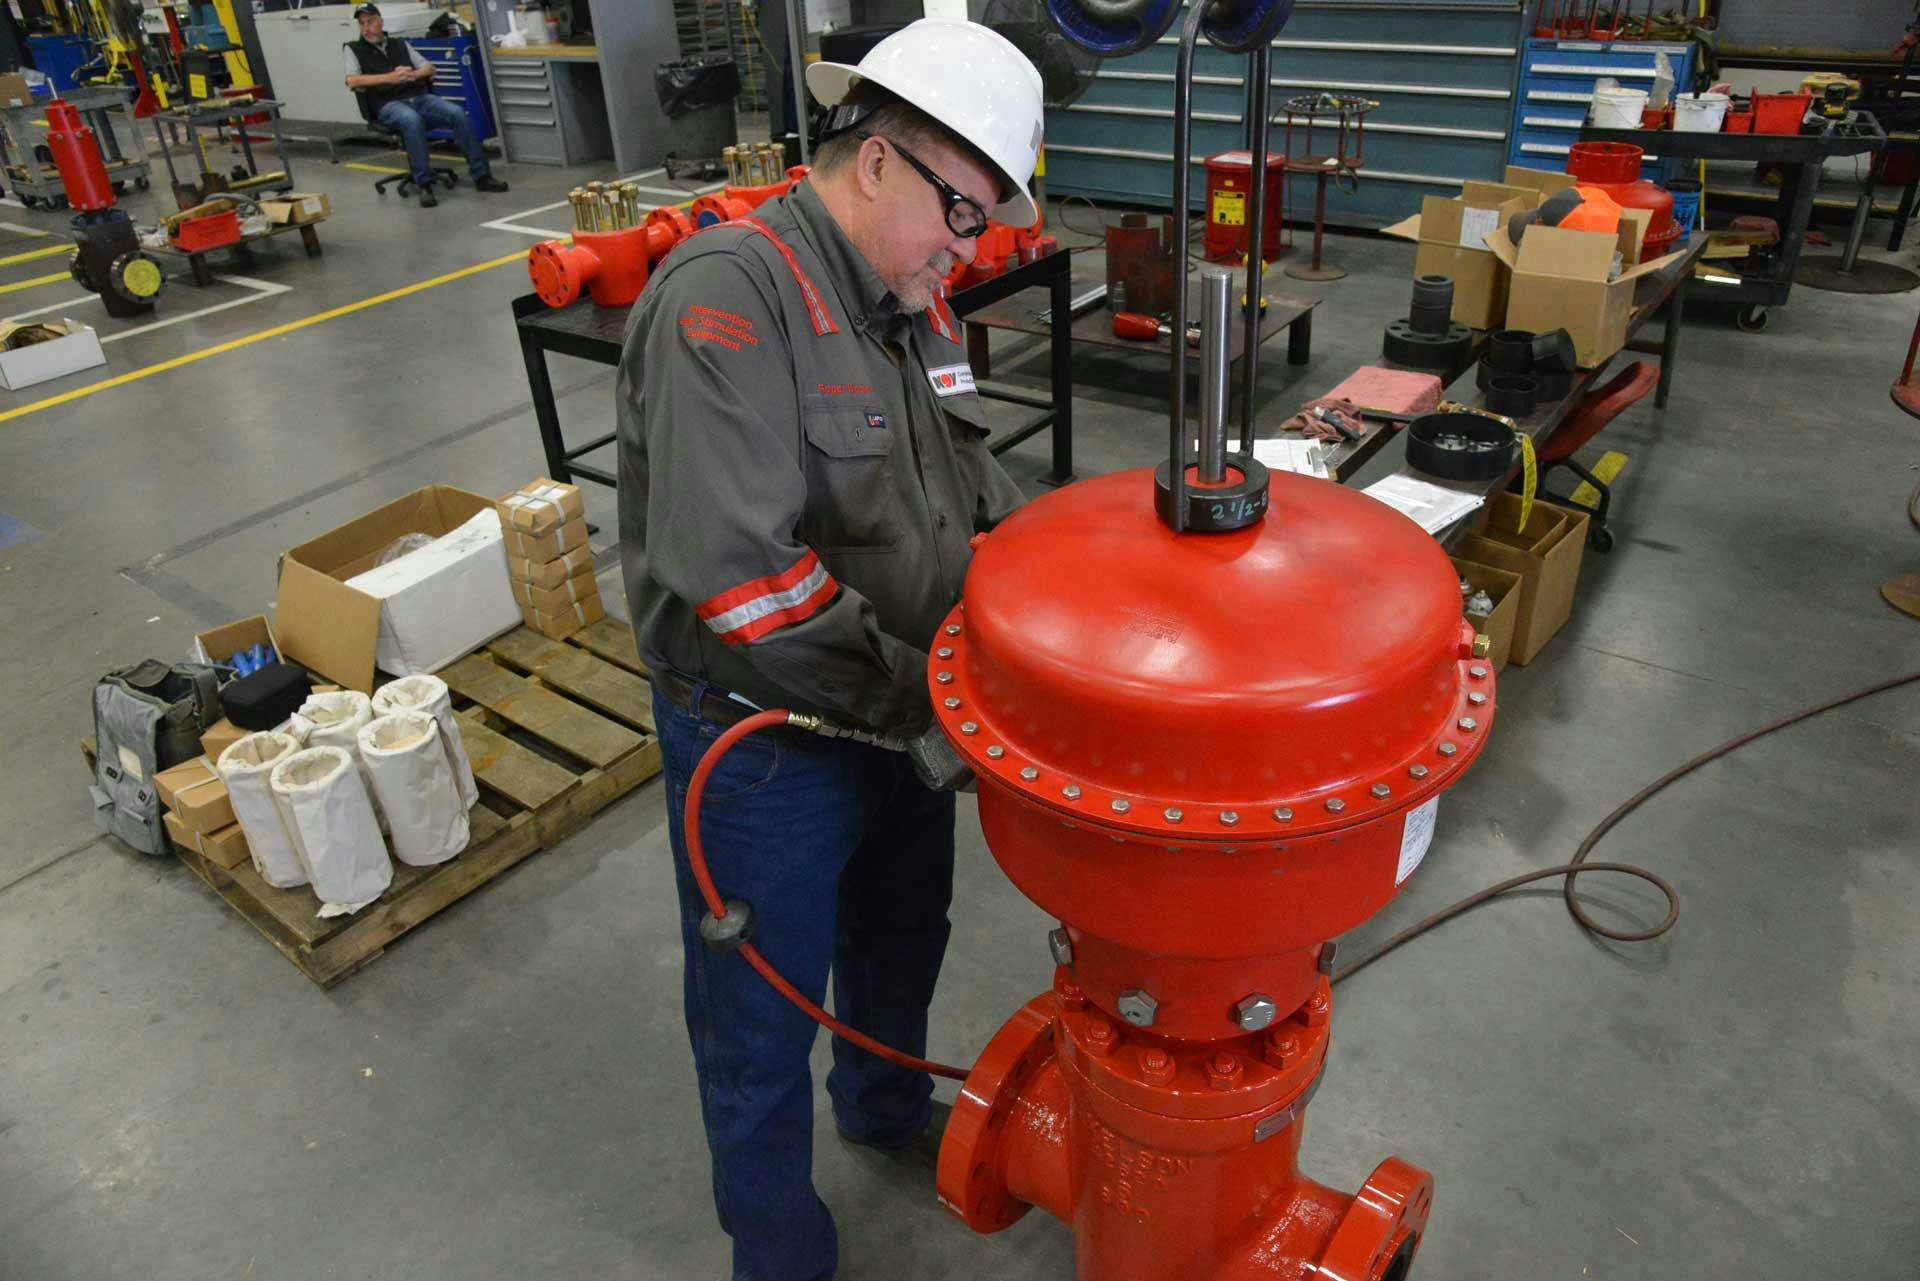 A technician works on a Pneumatic Shutdown Valve in a manufacturing facility